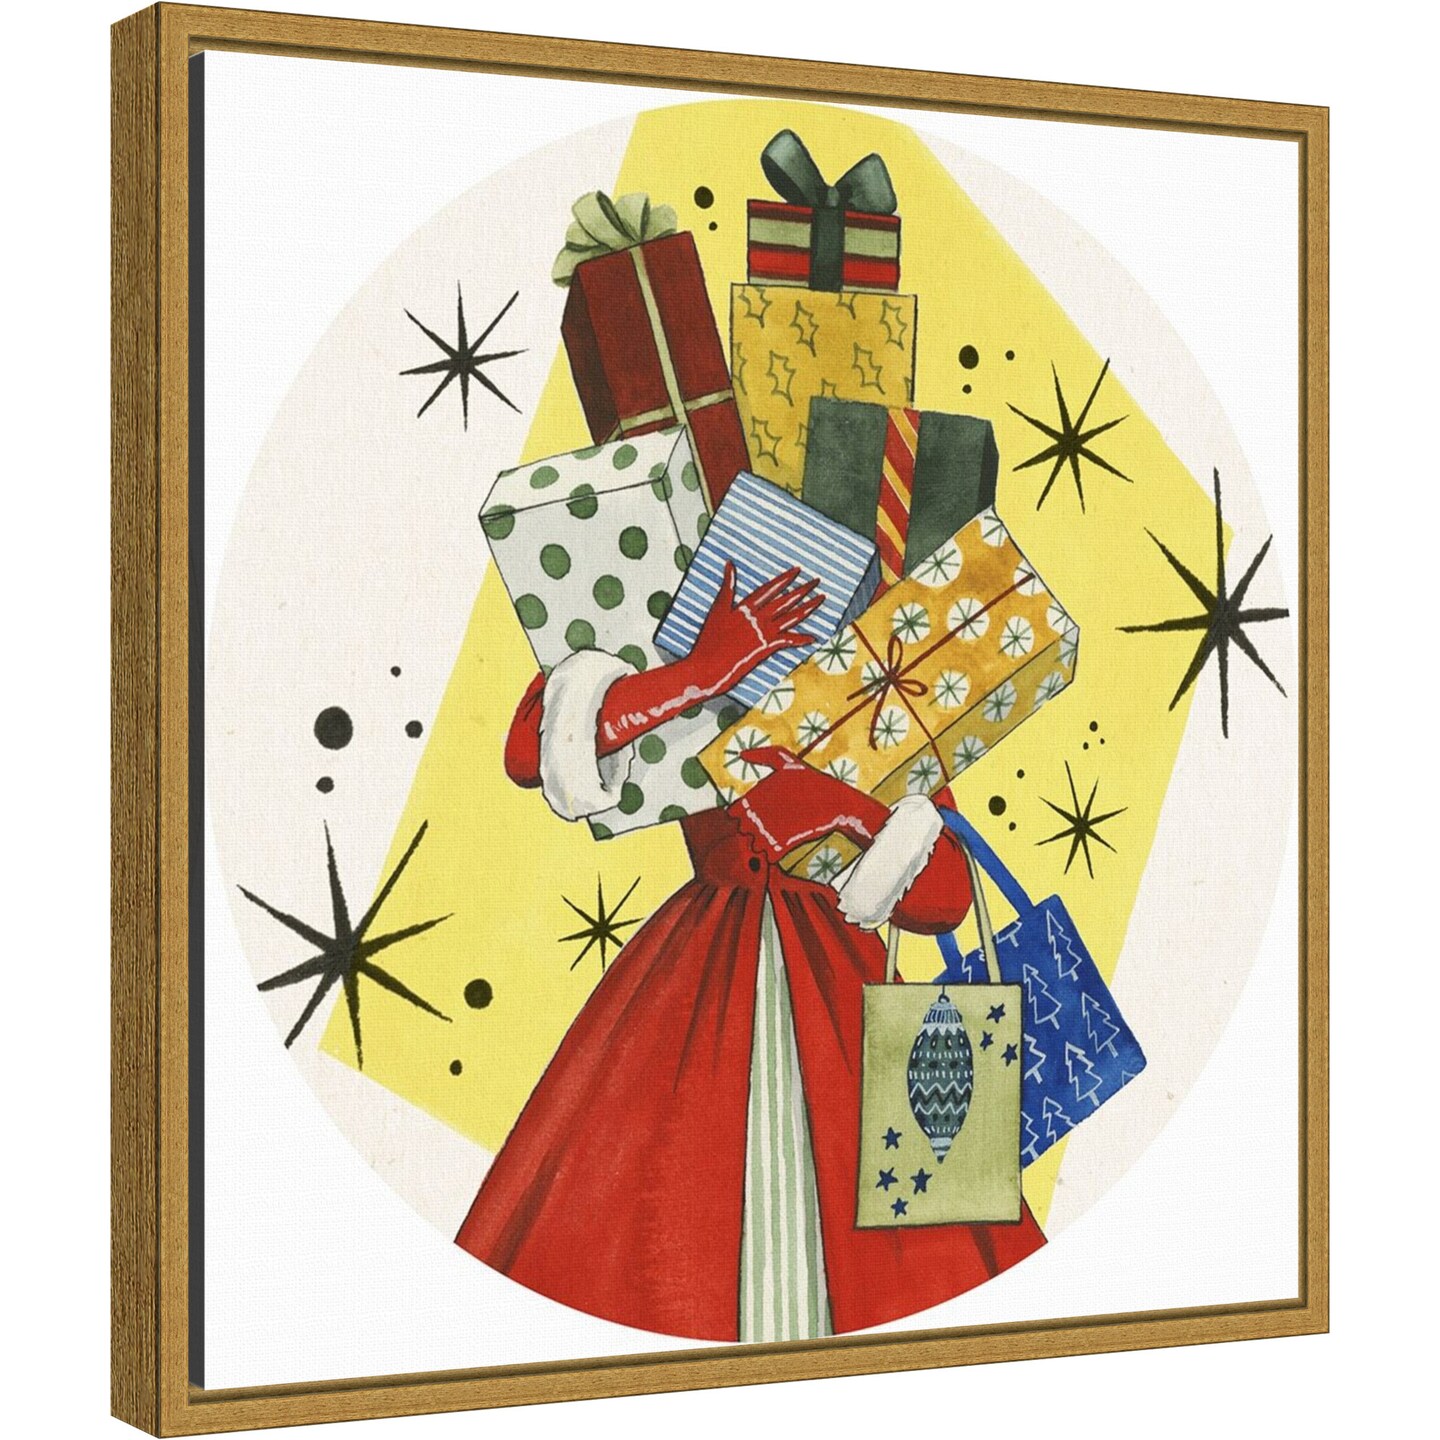 Vintage Christmas Gifts by Grace Popp 16-in. W x 16-in. H. Canvas Wall Art Print Framed in Gold